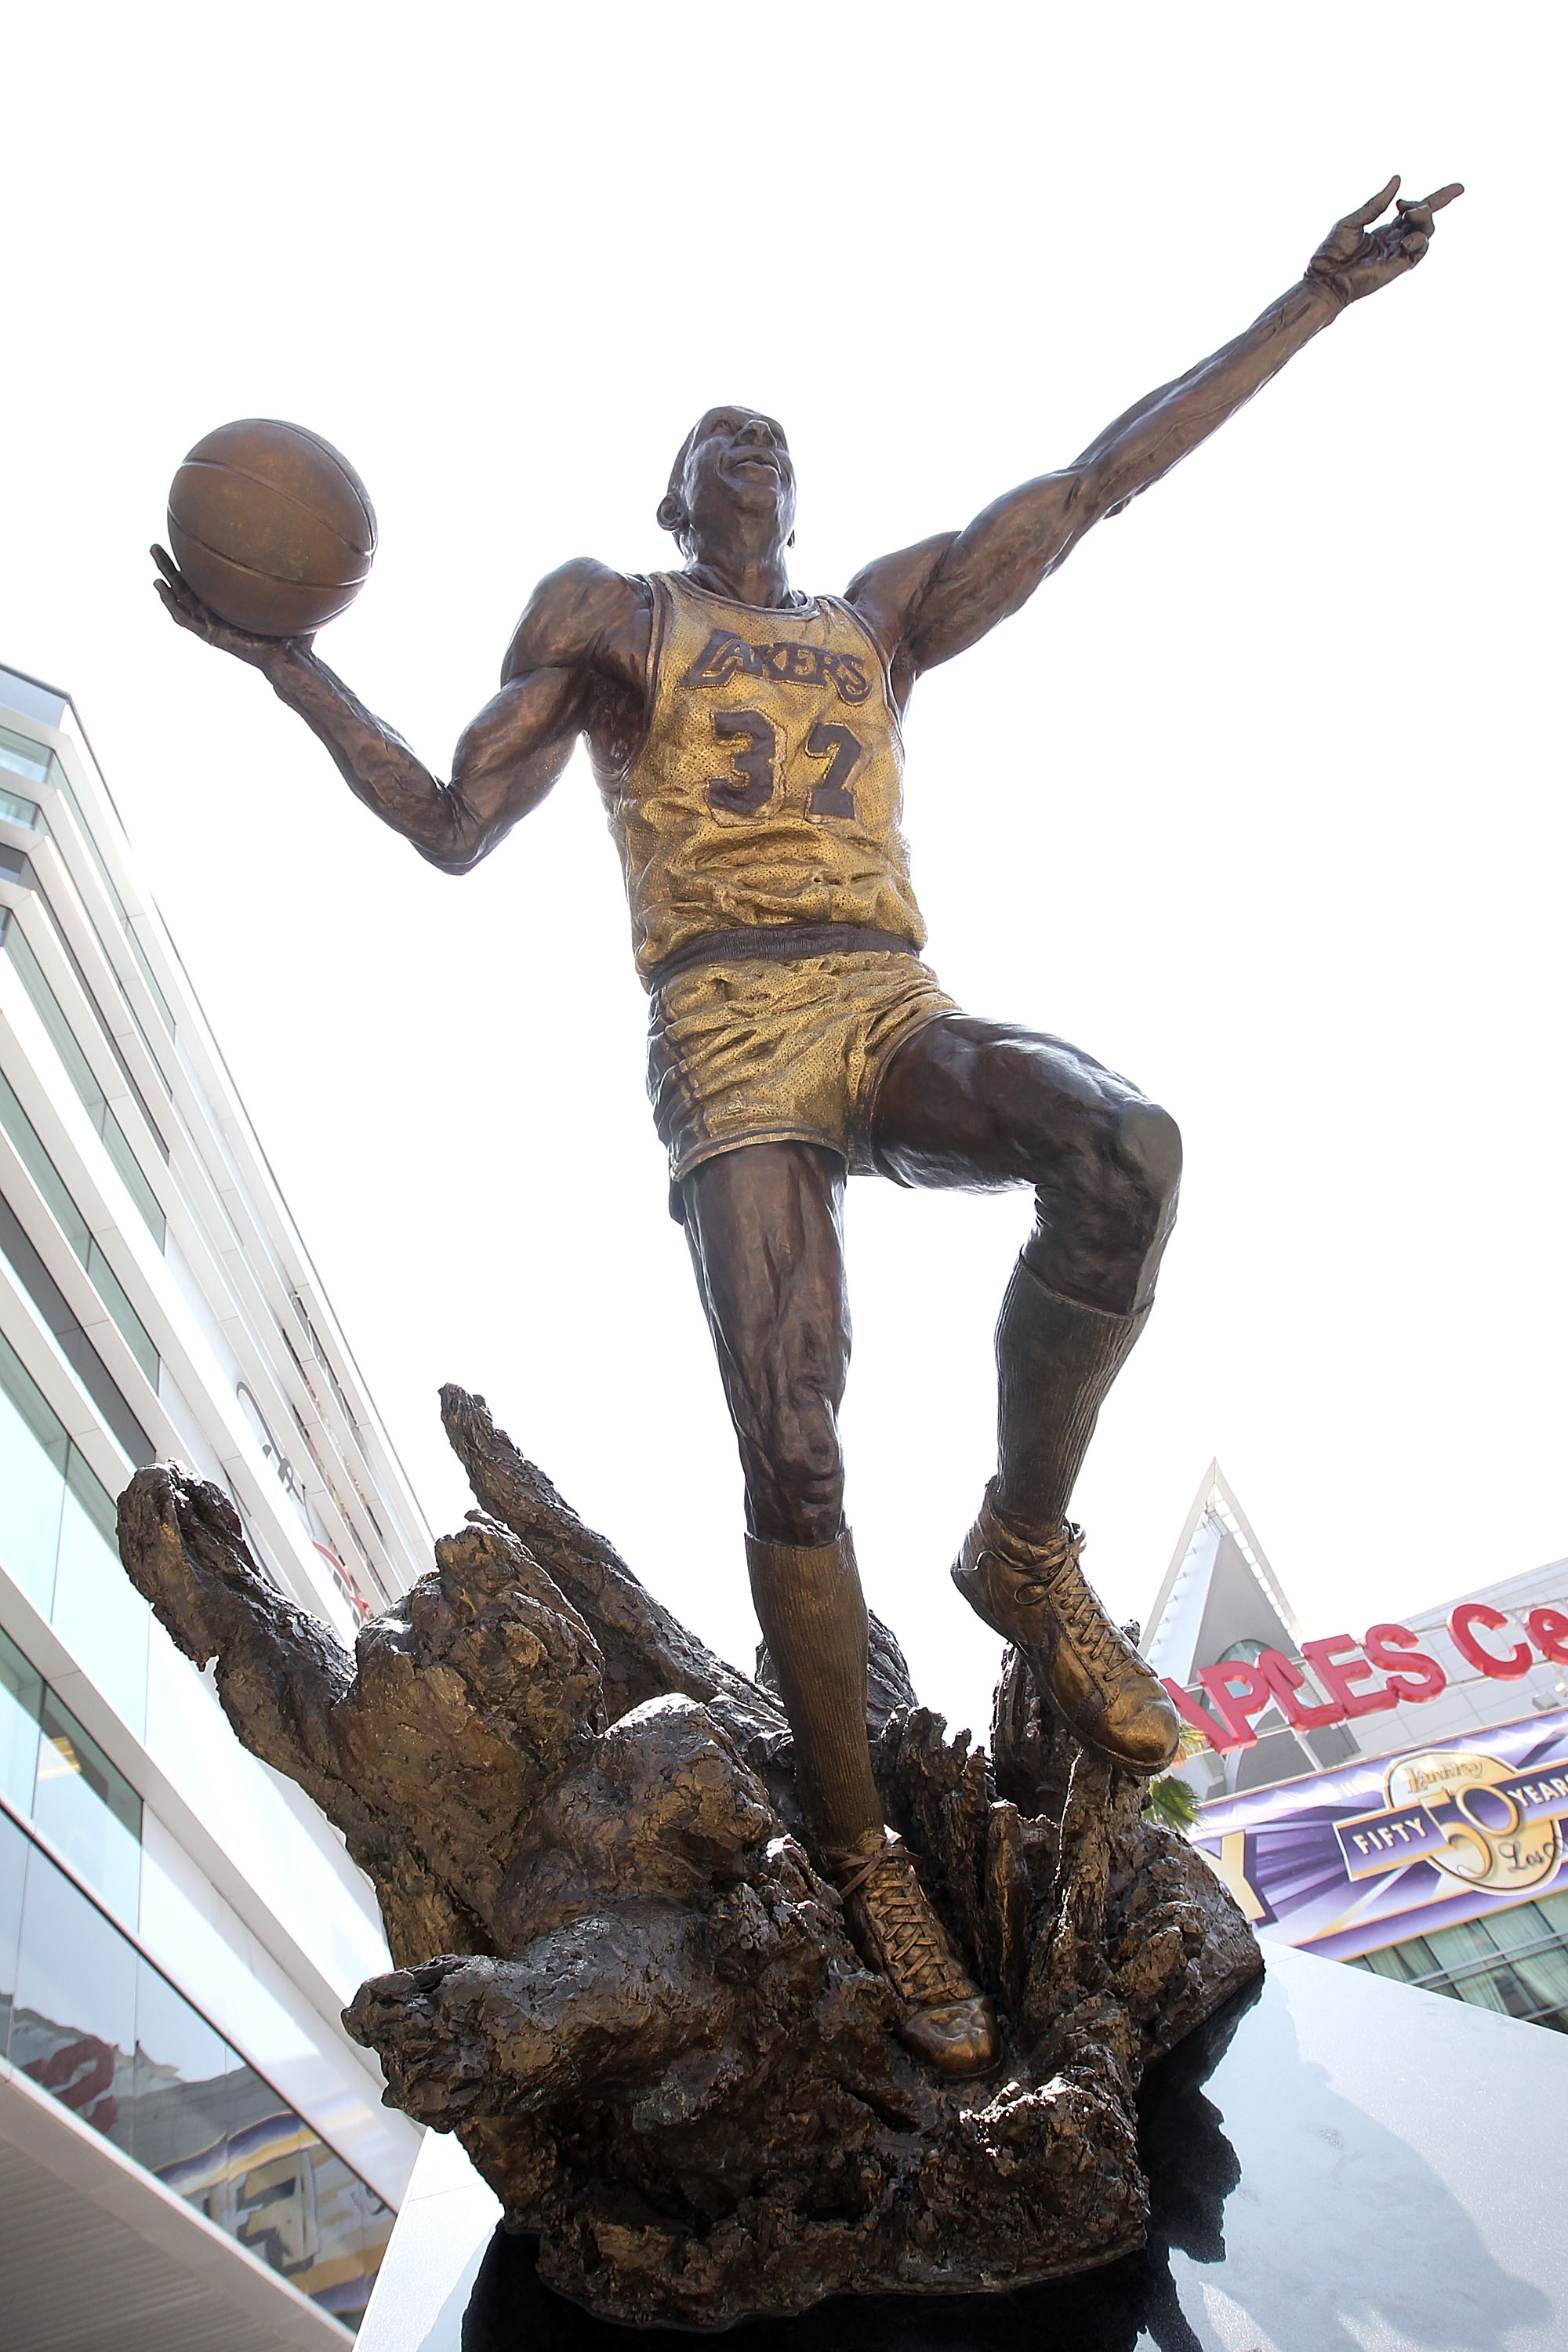 LOS ANGELES, CA - JUNE 03:  A statue of legendary Lakers' player Magic Johnson is shown outside of the Staples Center before the game between the Boston Celtics and the Los Angeles Lakers in Game One of the 2010 NBA Finals on June 3, 2010 in Los Angeles, 